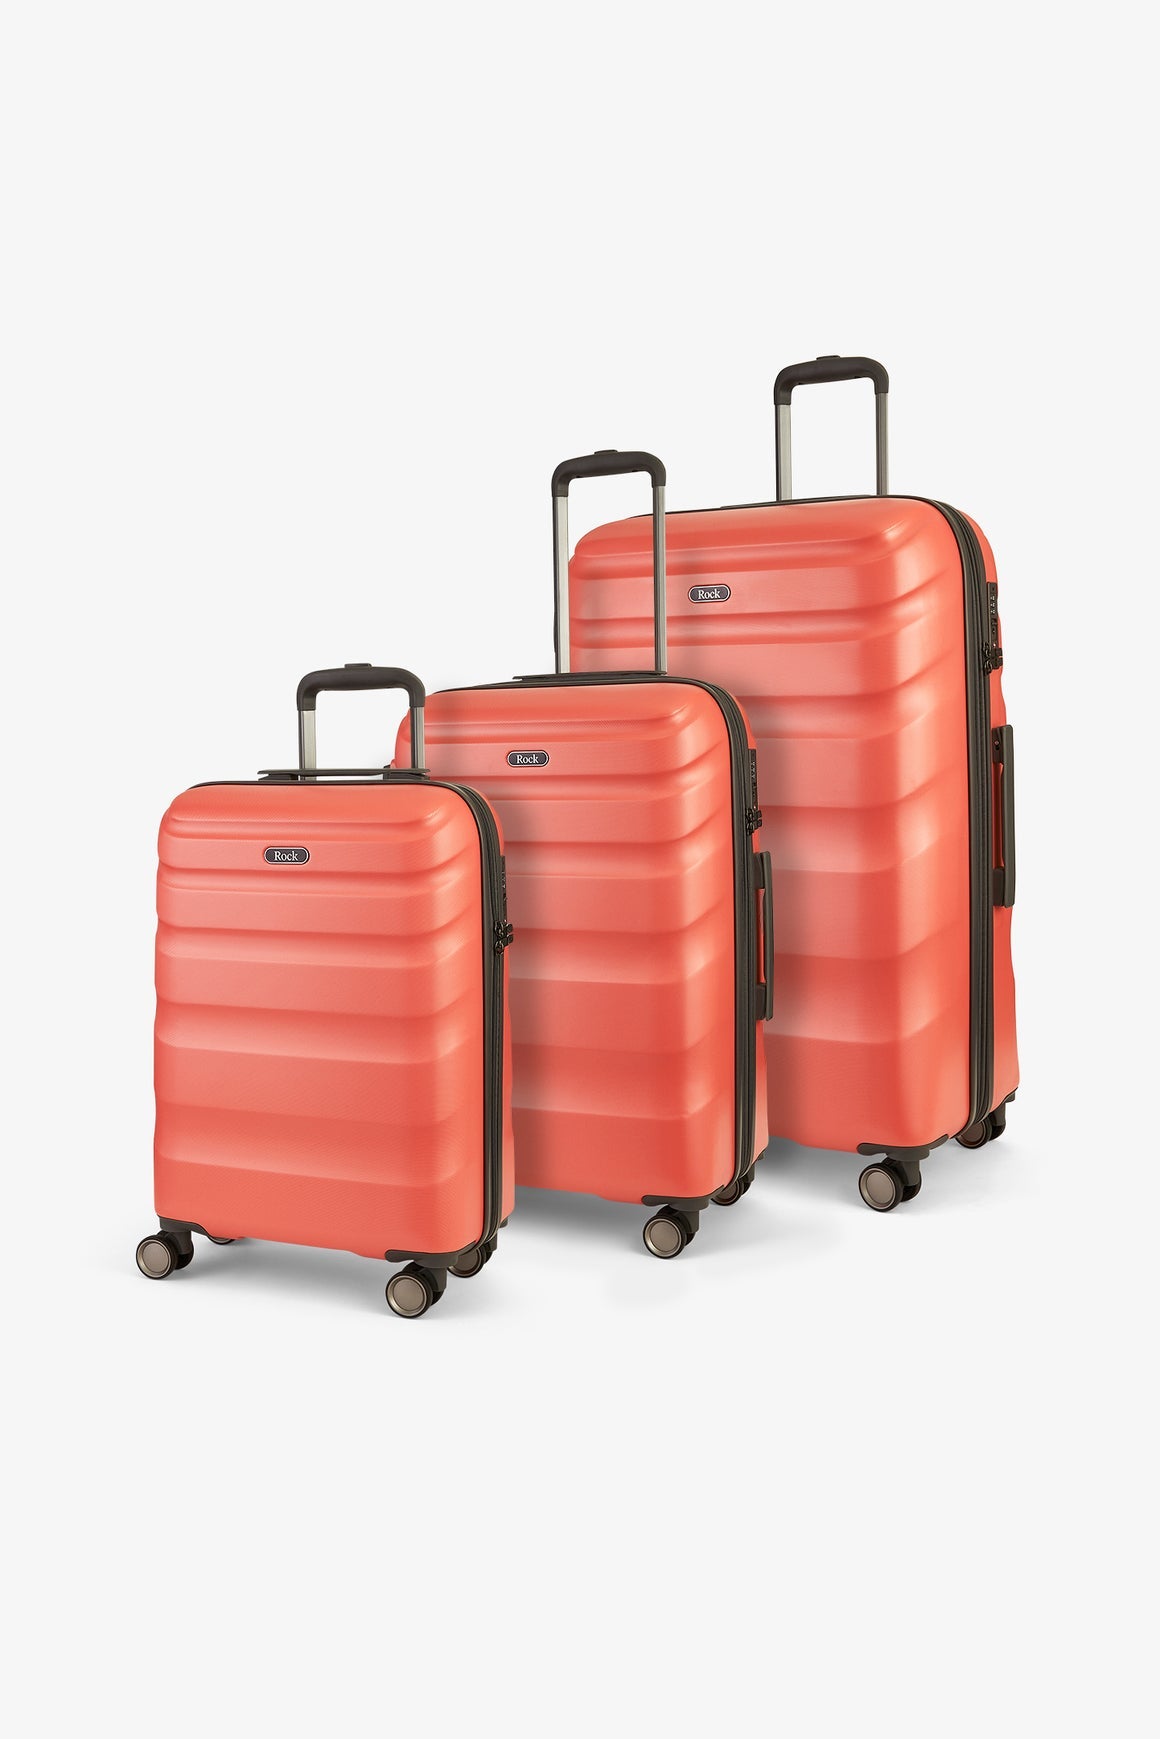 Bali Set of 3 Suitcases